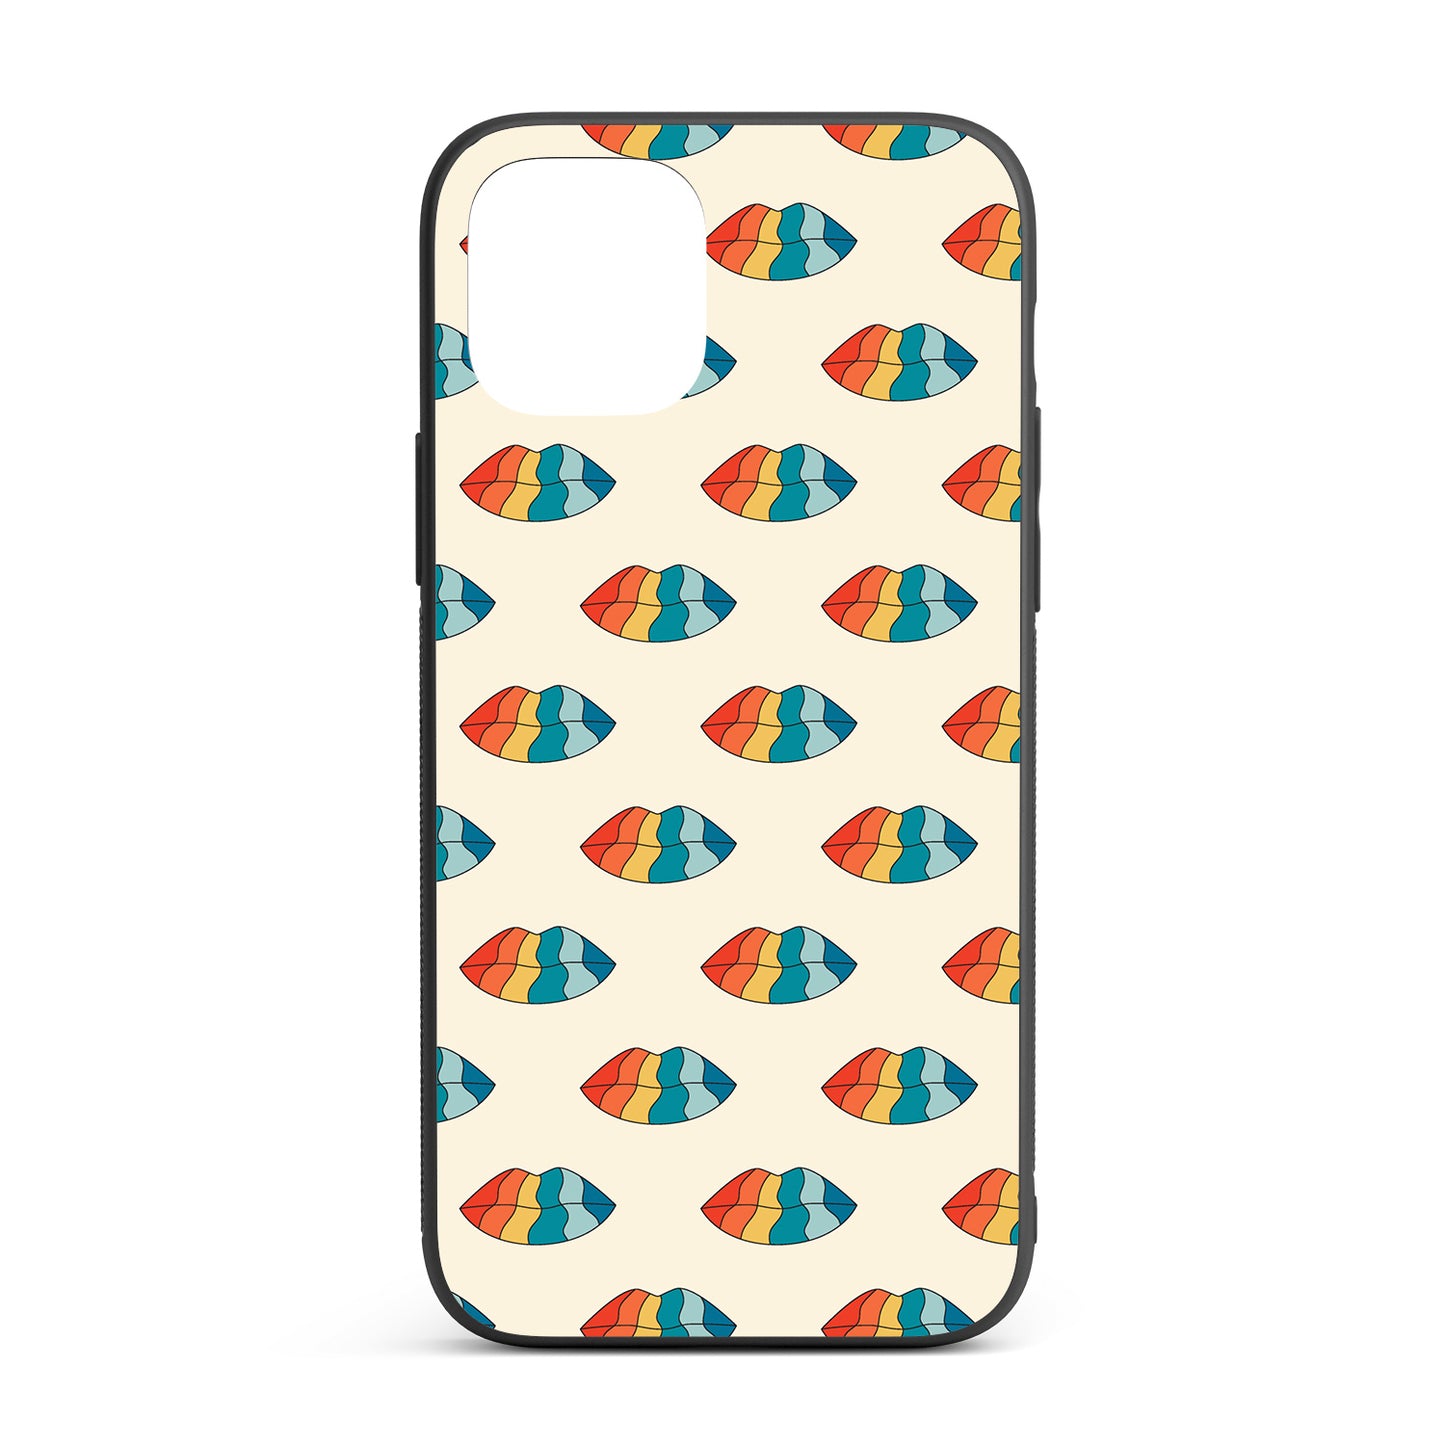 Love is Love iPhone glass case